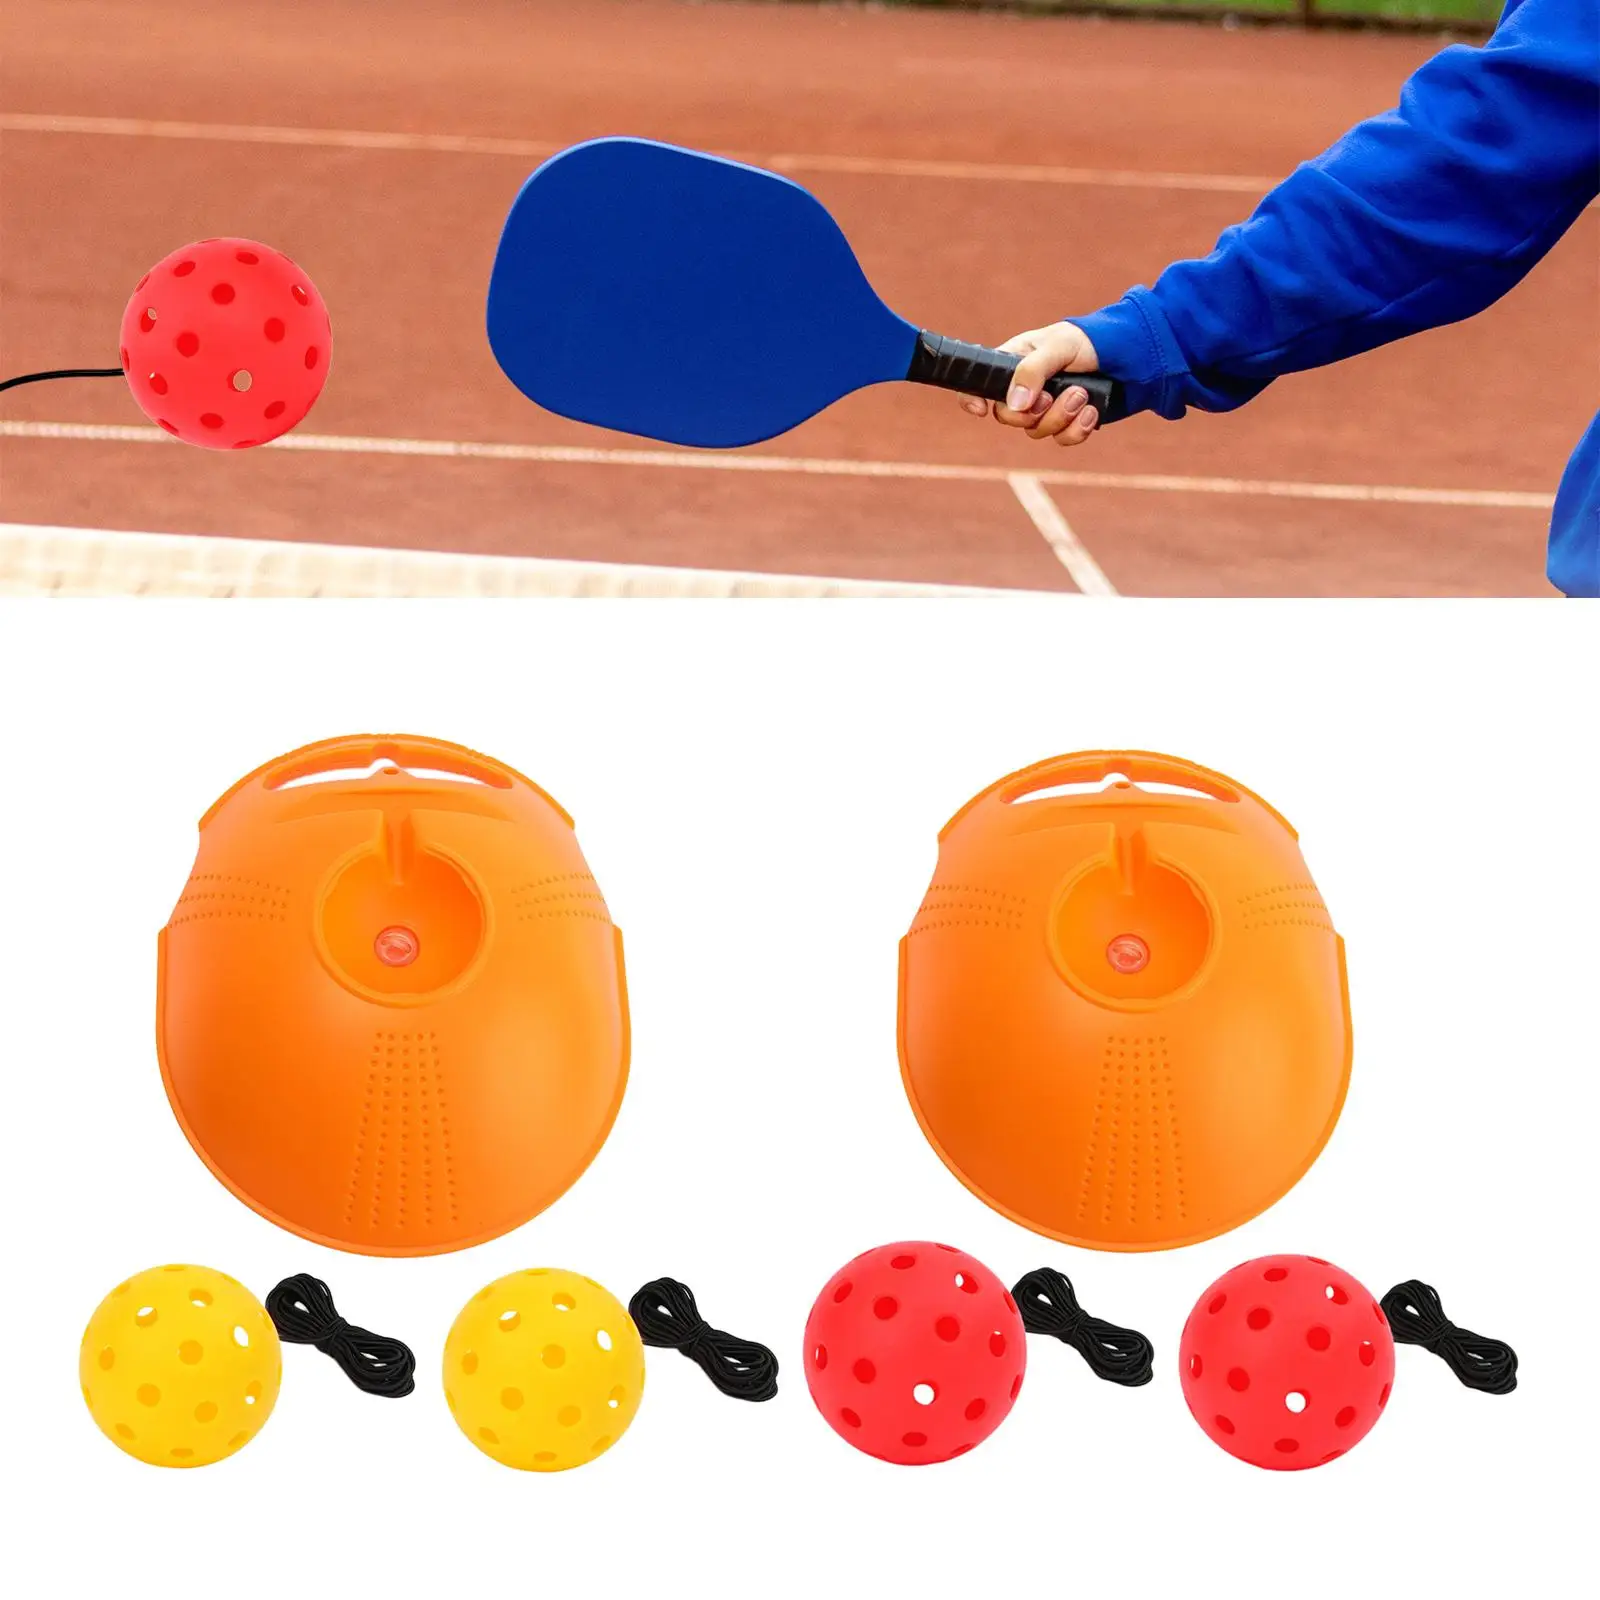 Portable Pickleball Trainer with 40 Holes Pickleball Ball for Single Player